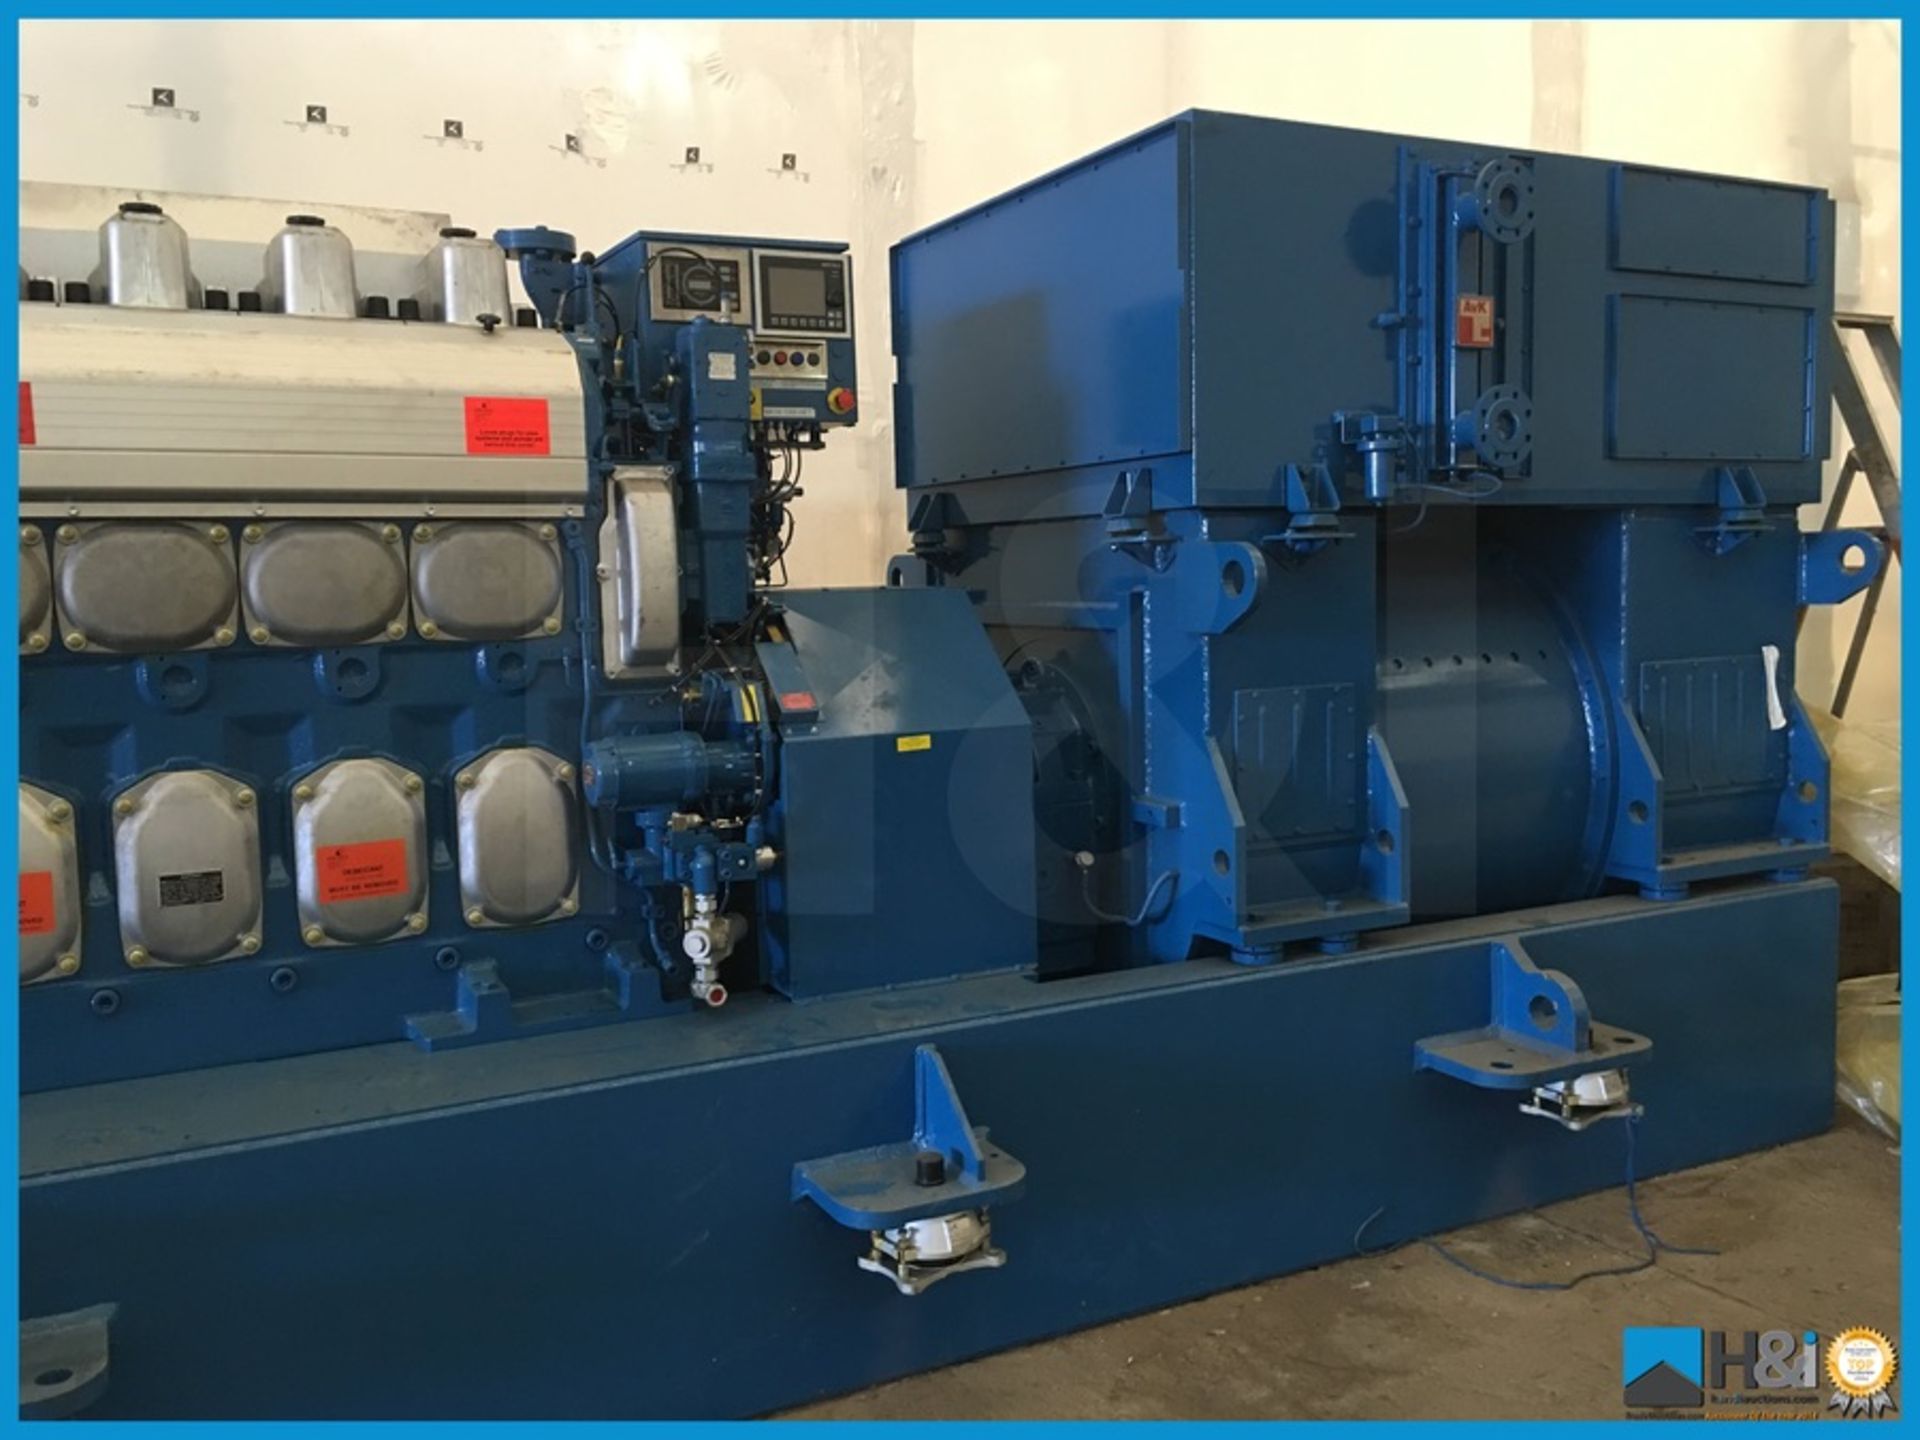 Unused Wartsila 8L20 high capacity diesel generator manufactured in 2013 for a large marine - Image 2 of 19